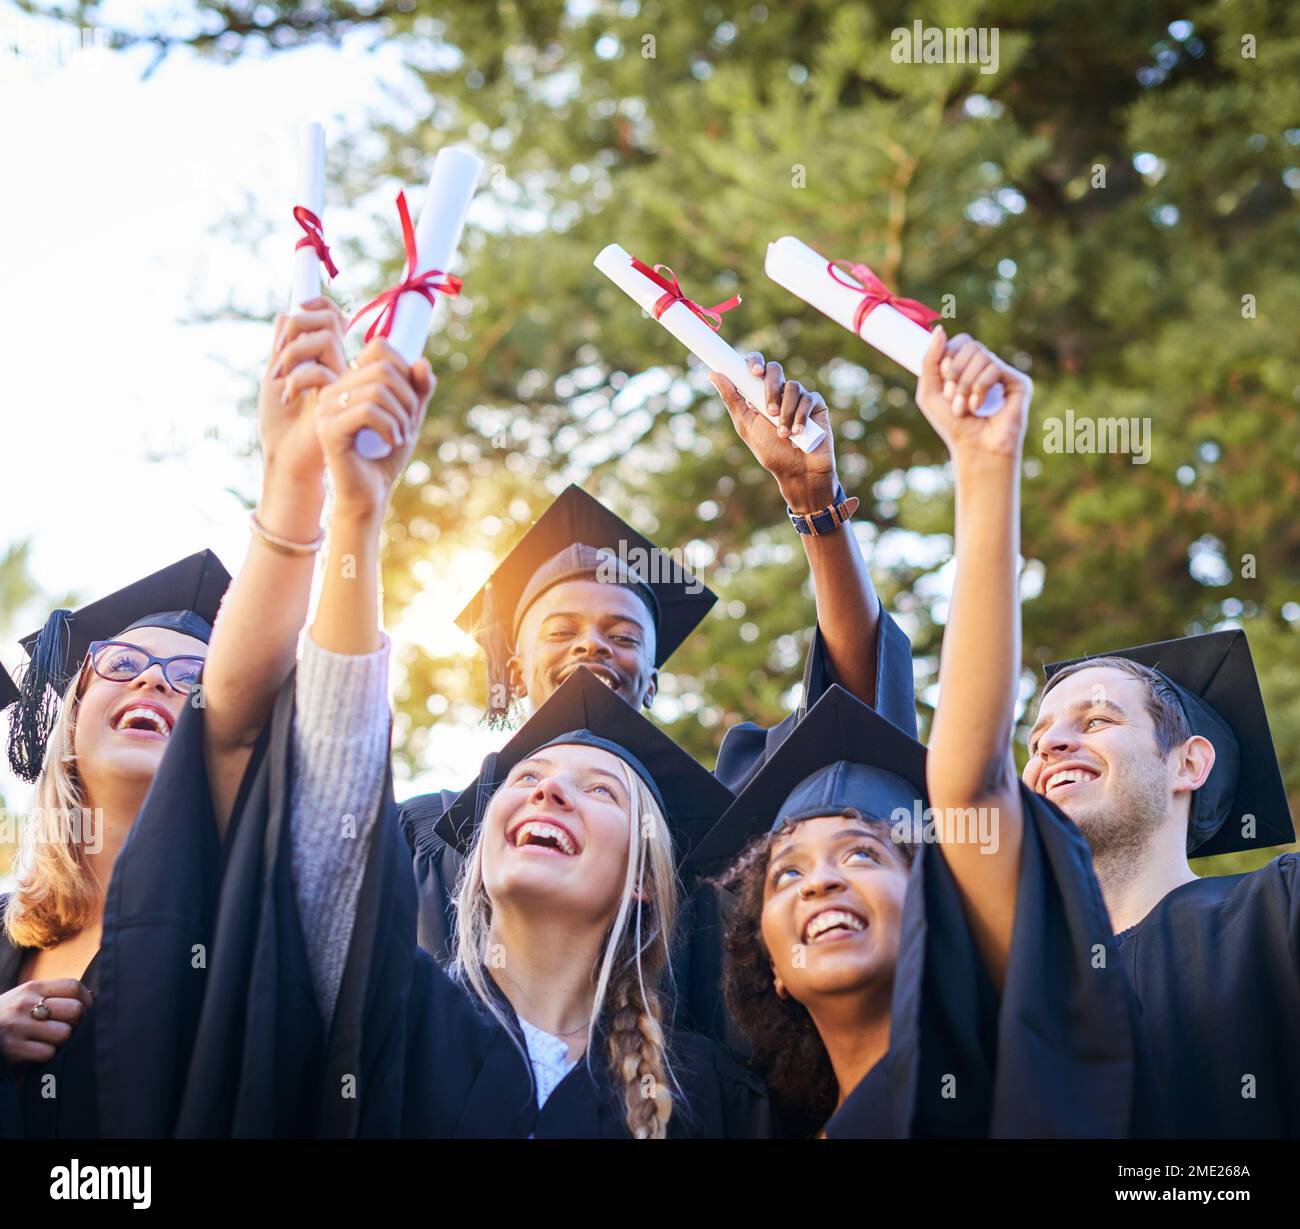 The culmination of years of hard work. a group of graduates holding their diplomas up in the air. Stock Photo